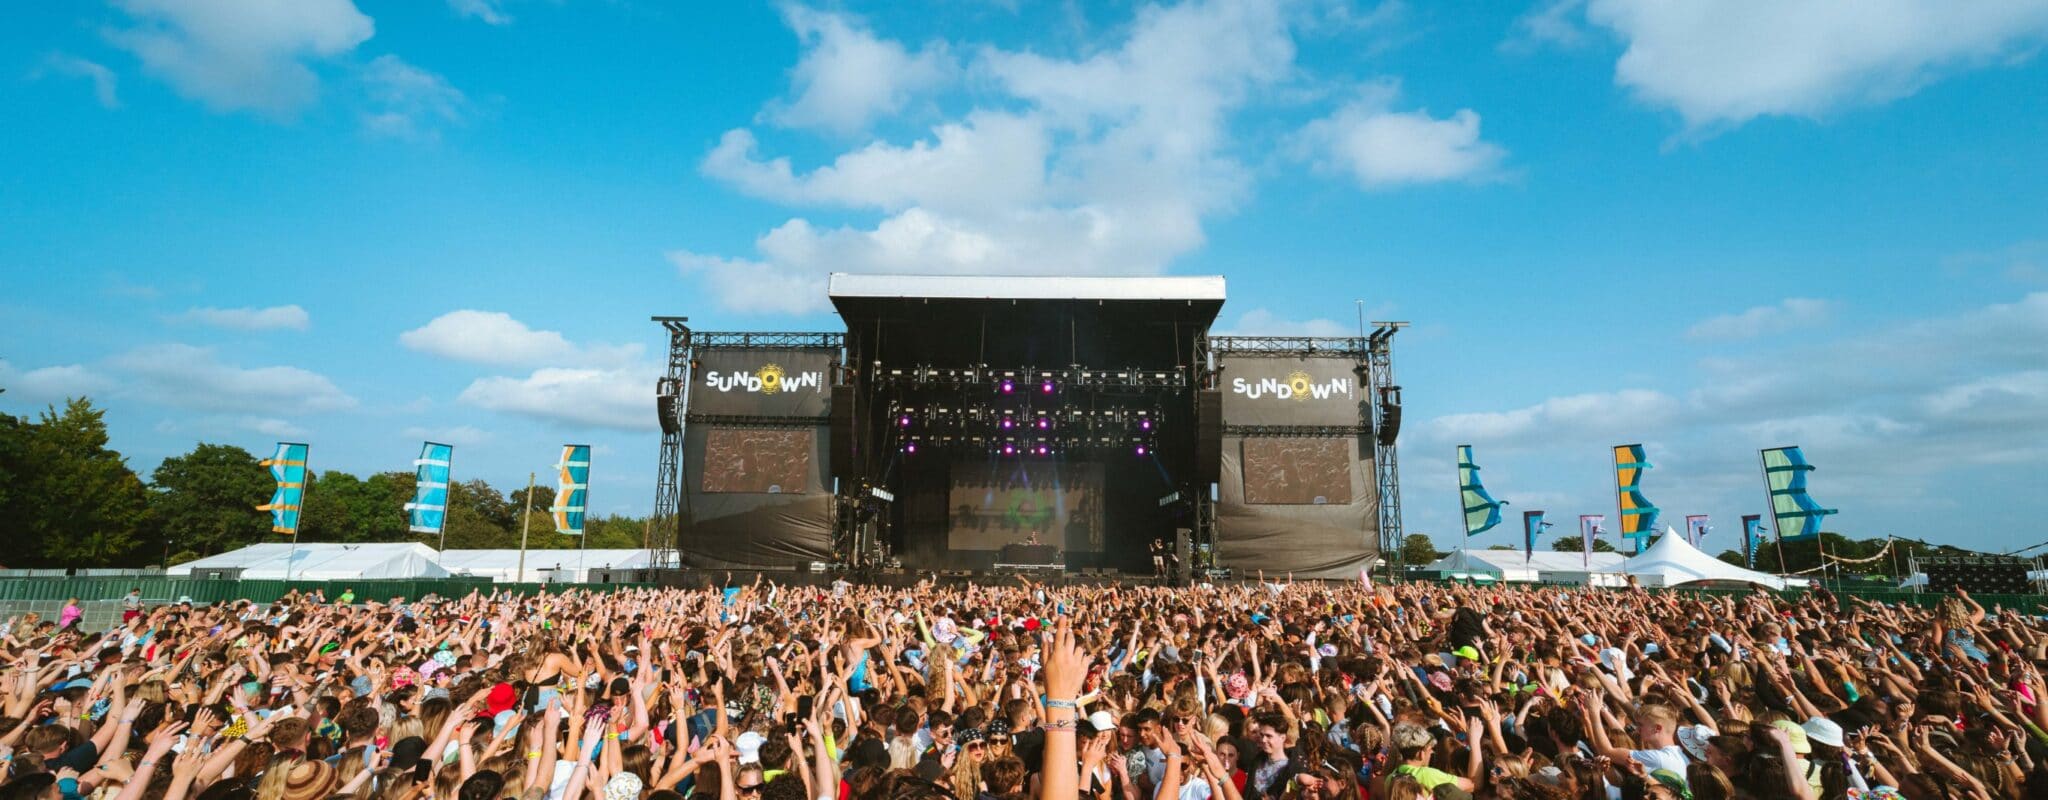 Sundown Festival 2022 how to get tickets, prices and the full lineup